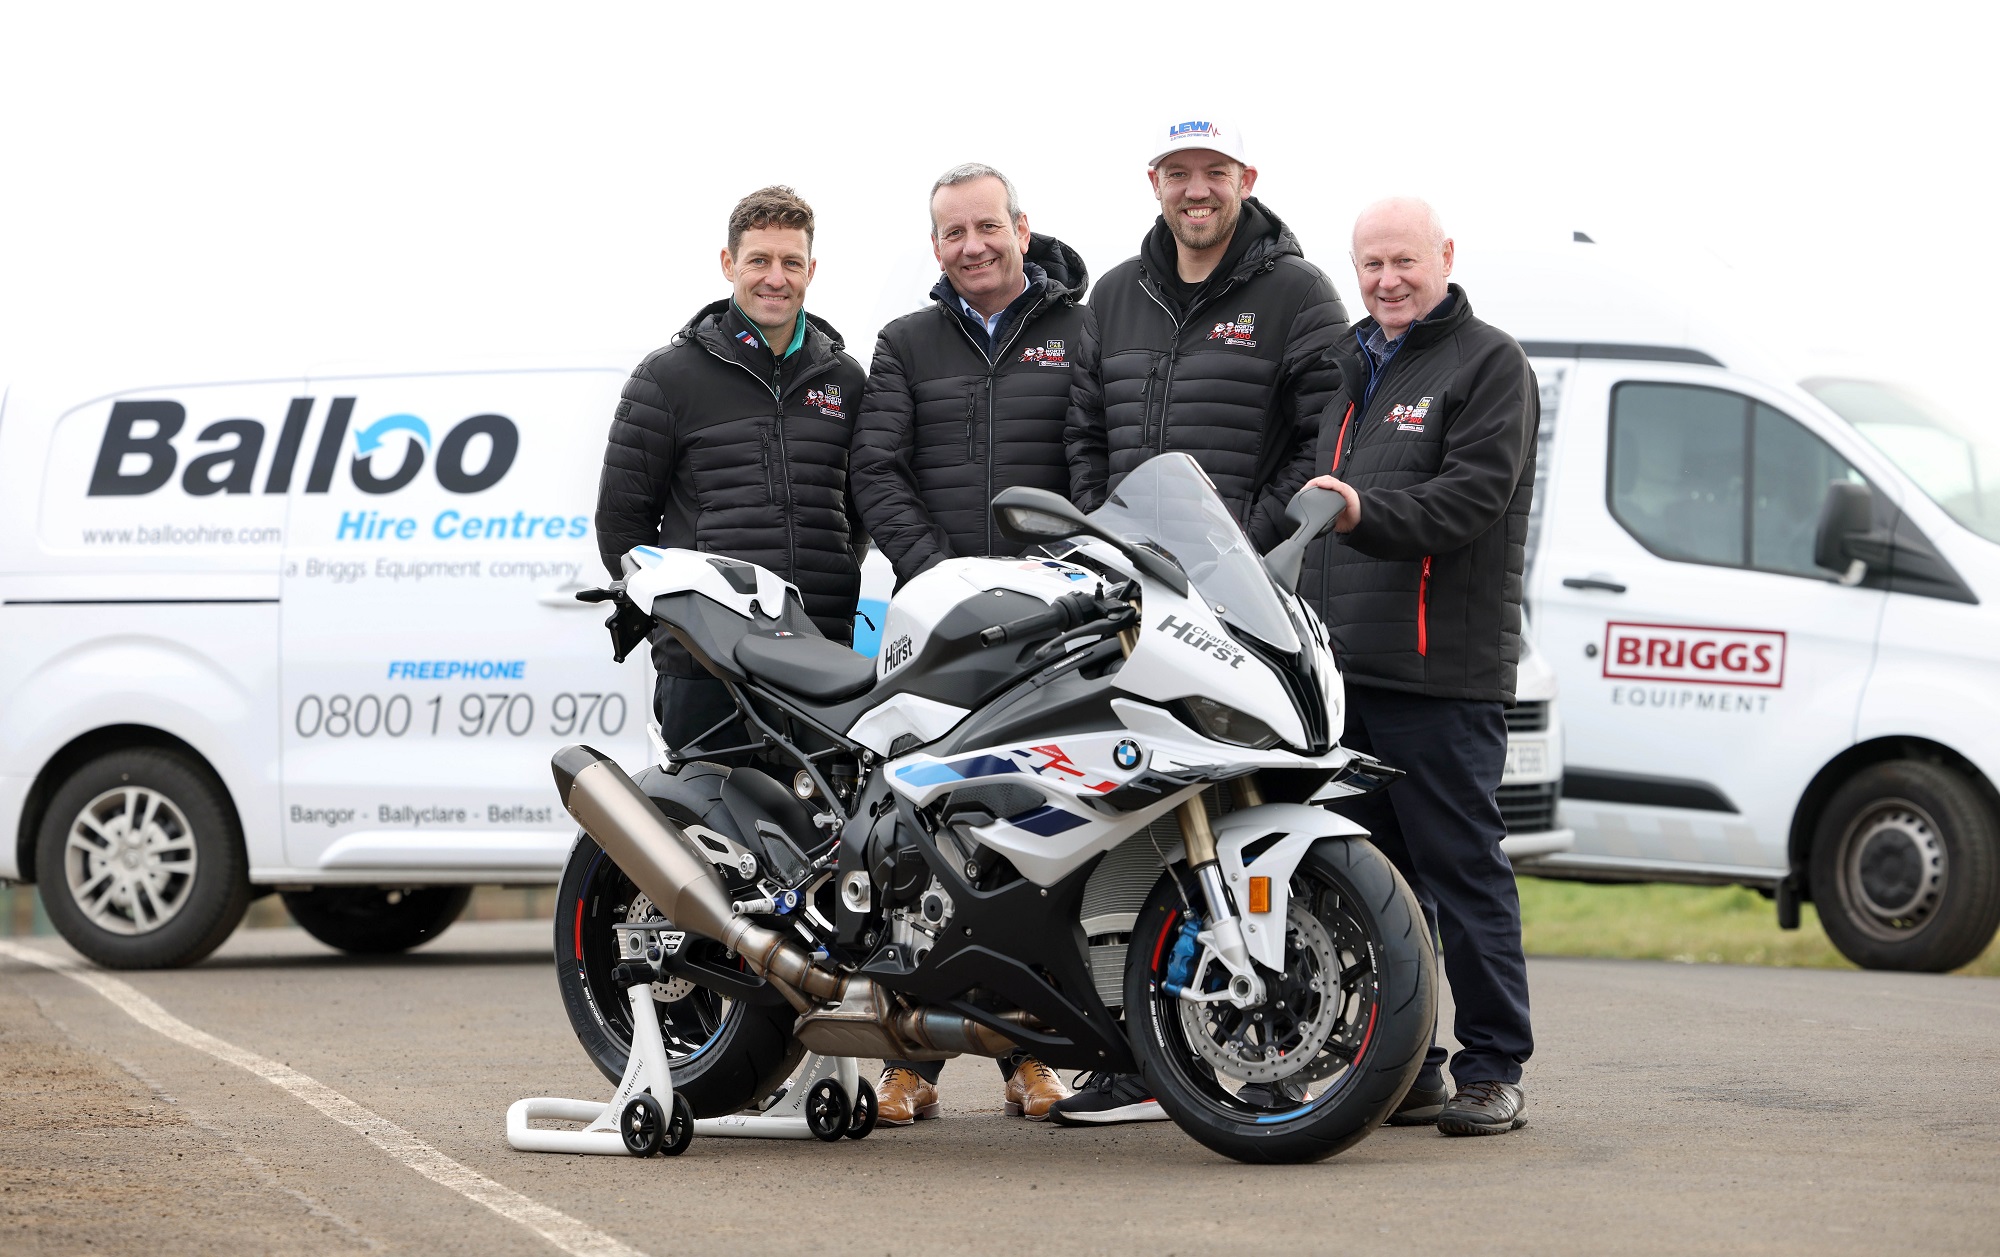 Briggs Equipment announced as race sponsor at the North West 200